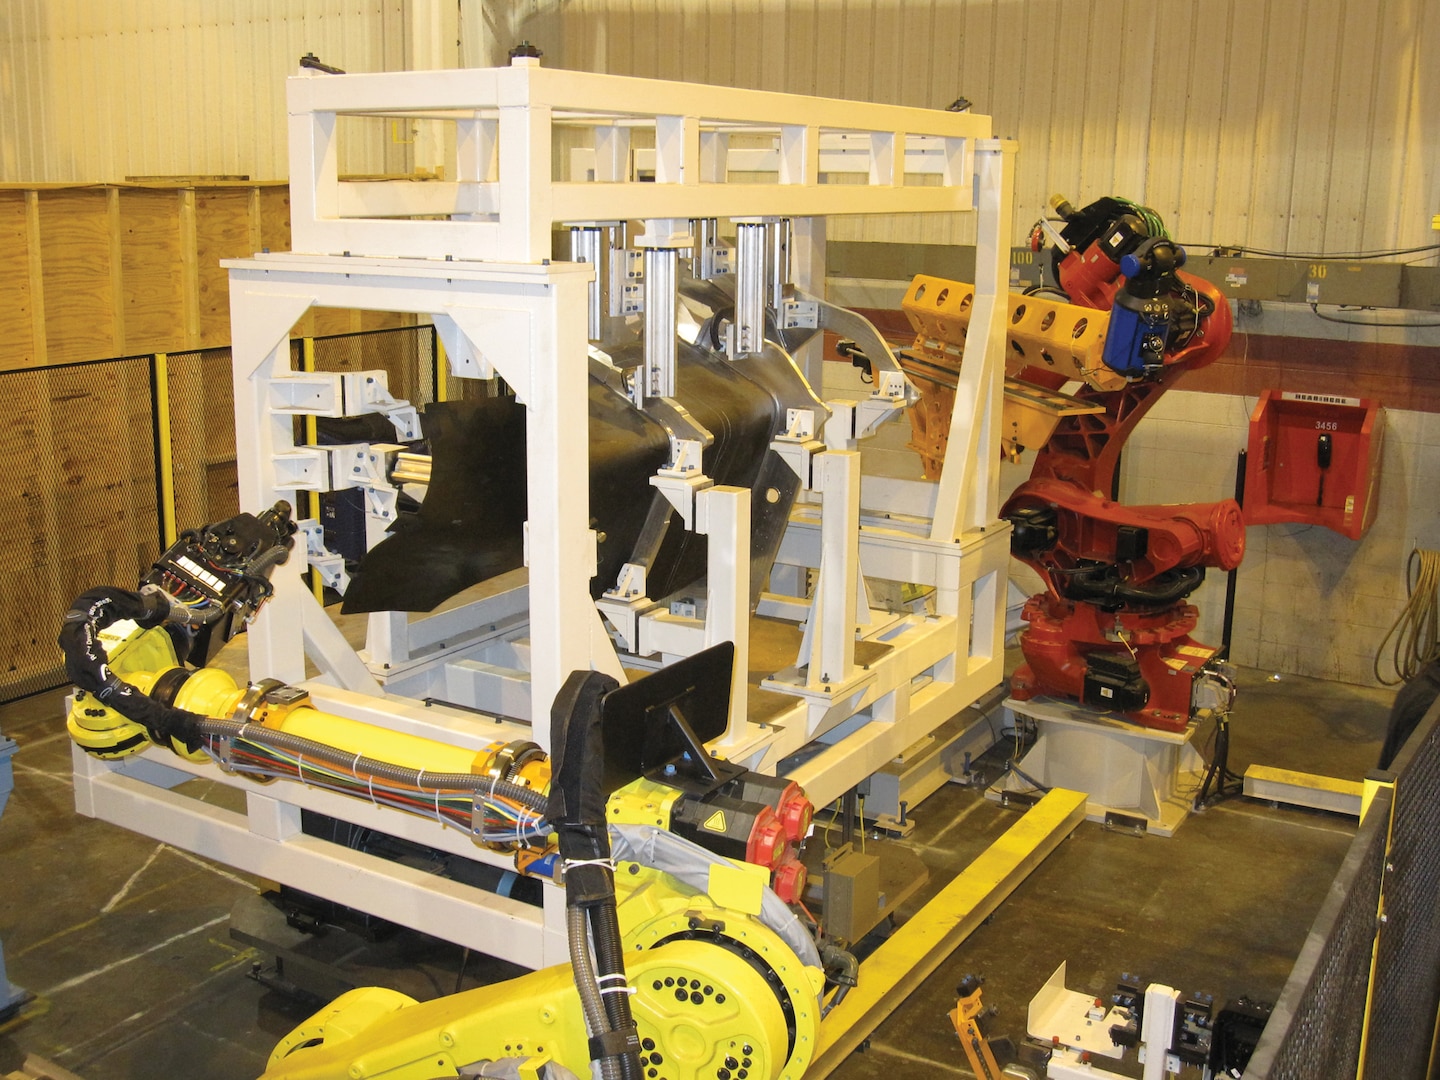 An Inlet Duct Robotic Drilling cell at work (AFRL image)